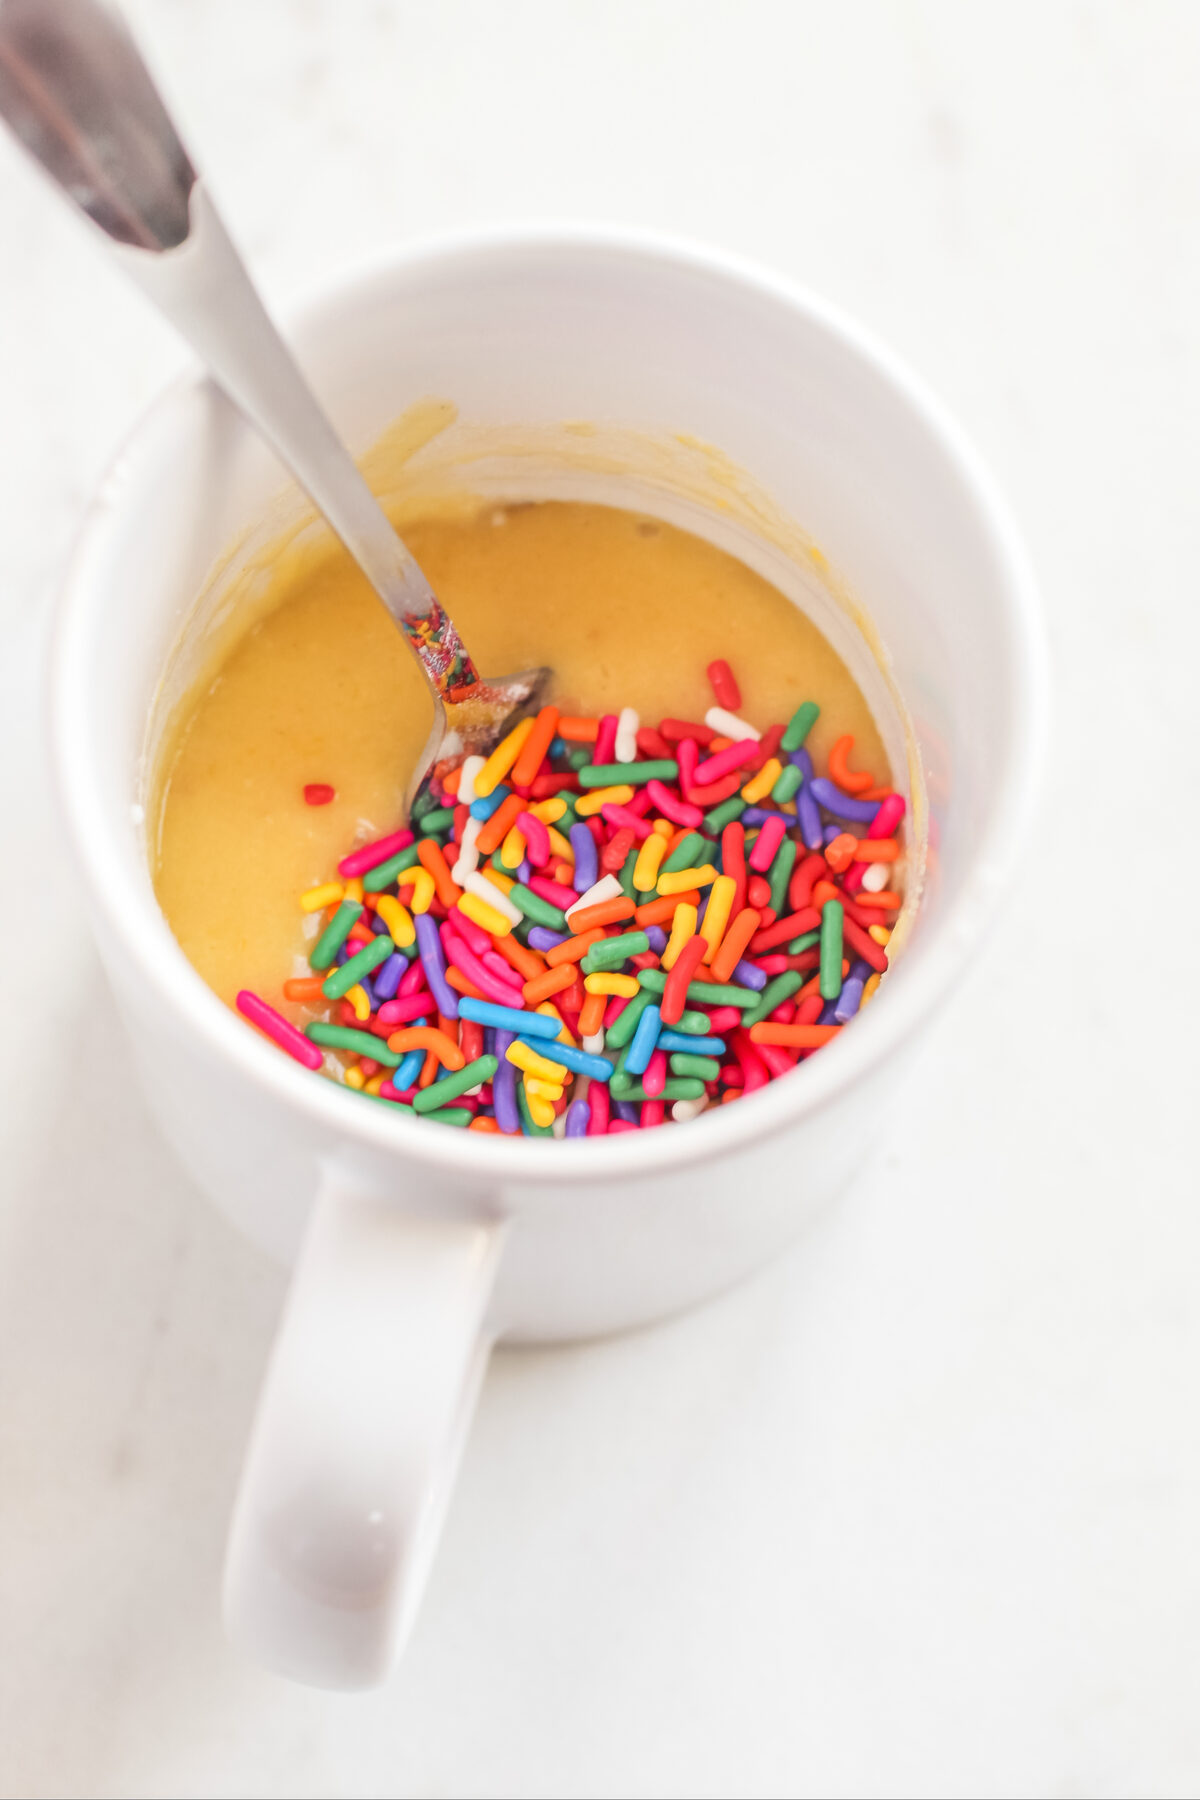 Sprinkles on top of the batter in the mug.